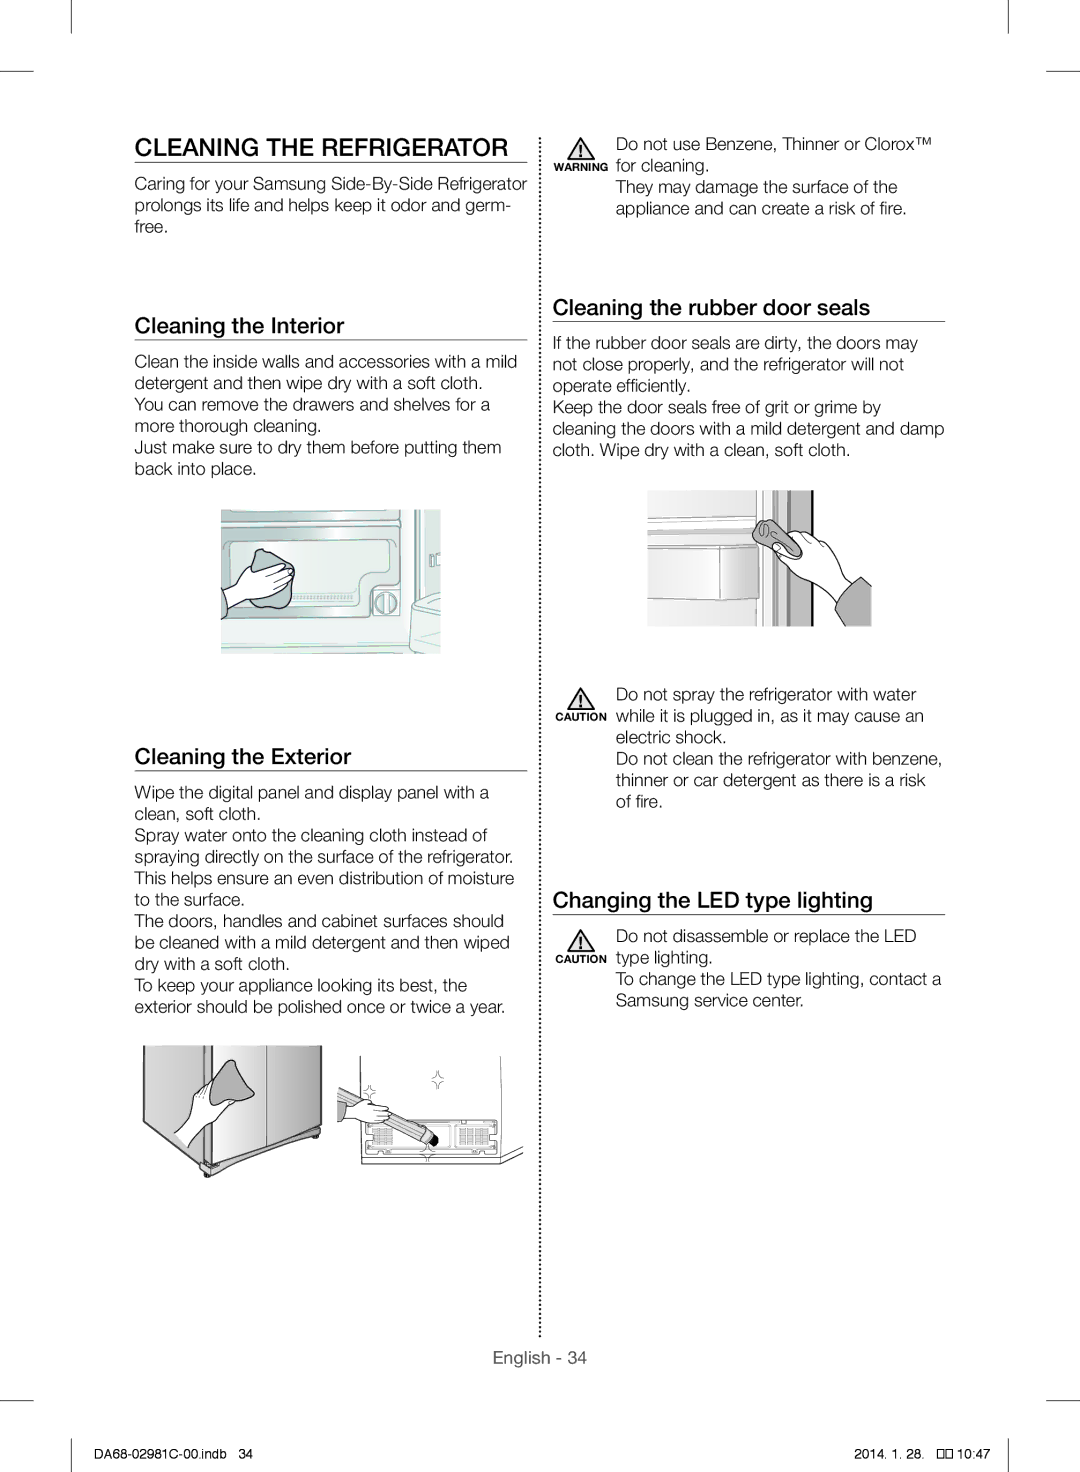 Samsung RS25H5223SL/ZA manual Cleaning the Refrigerator, Cleaning the Interior, Cleaning the Exterior 